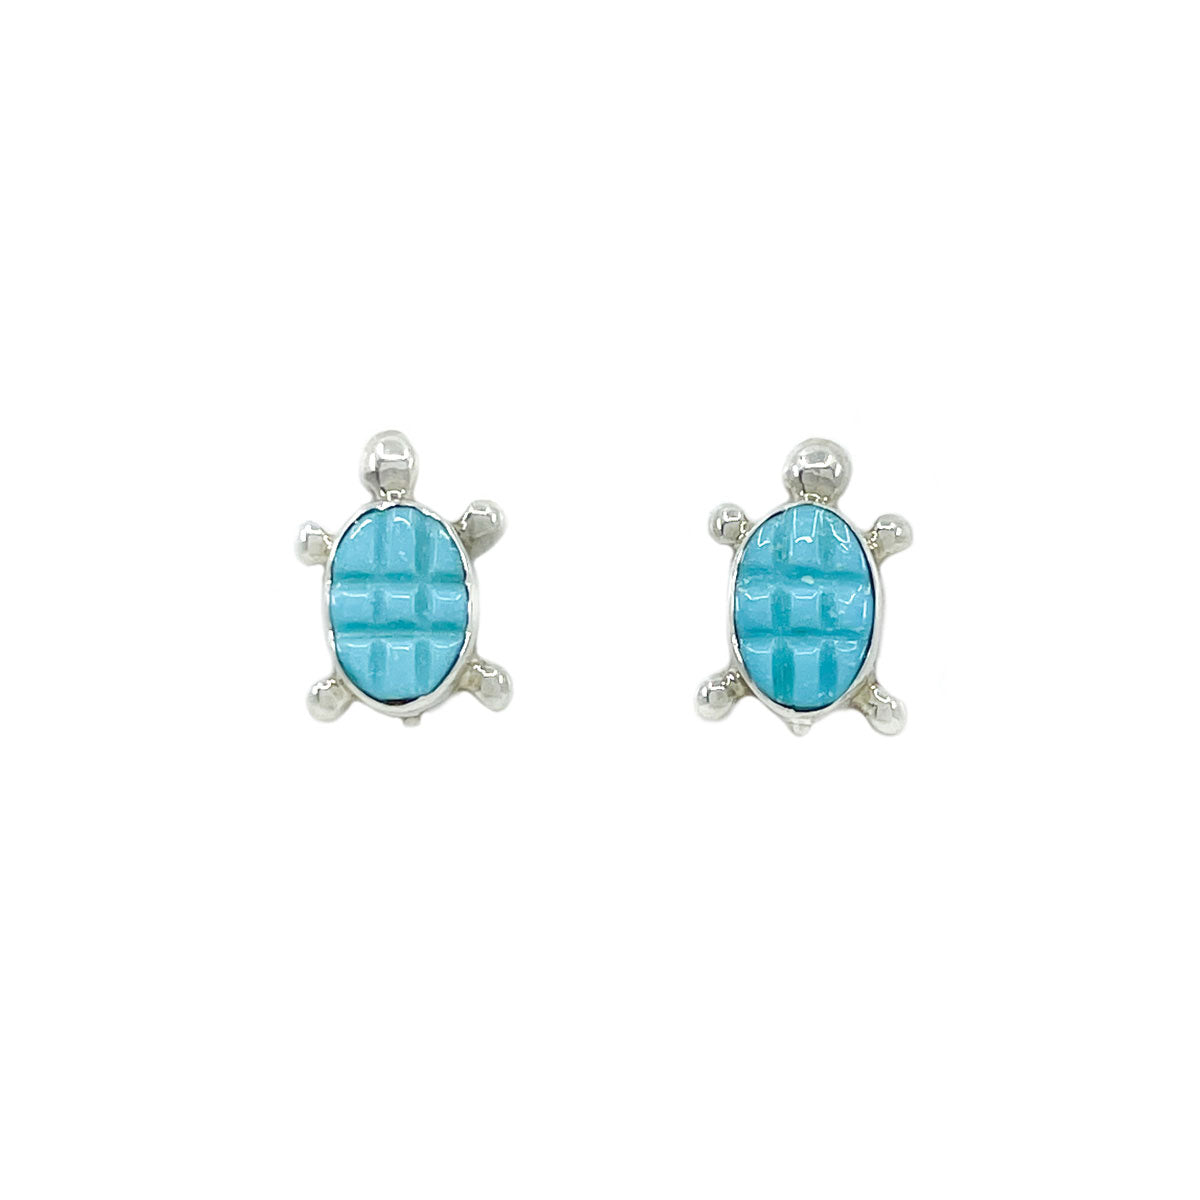 Small carved Sleeping Beauty Mine turquoise turtle stud earrings in sterling silver setting By Falena and Verona Malie Measures approx. 3/8 of and inch wide by .50 inches long 